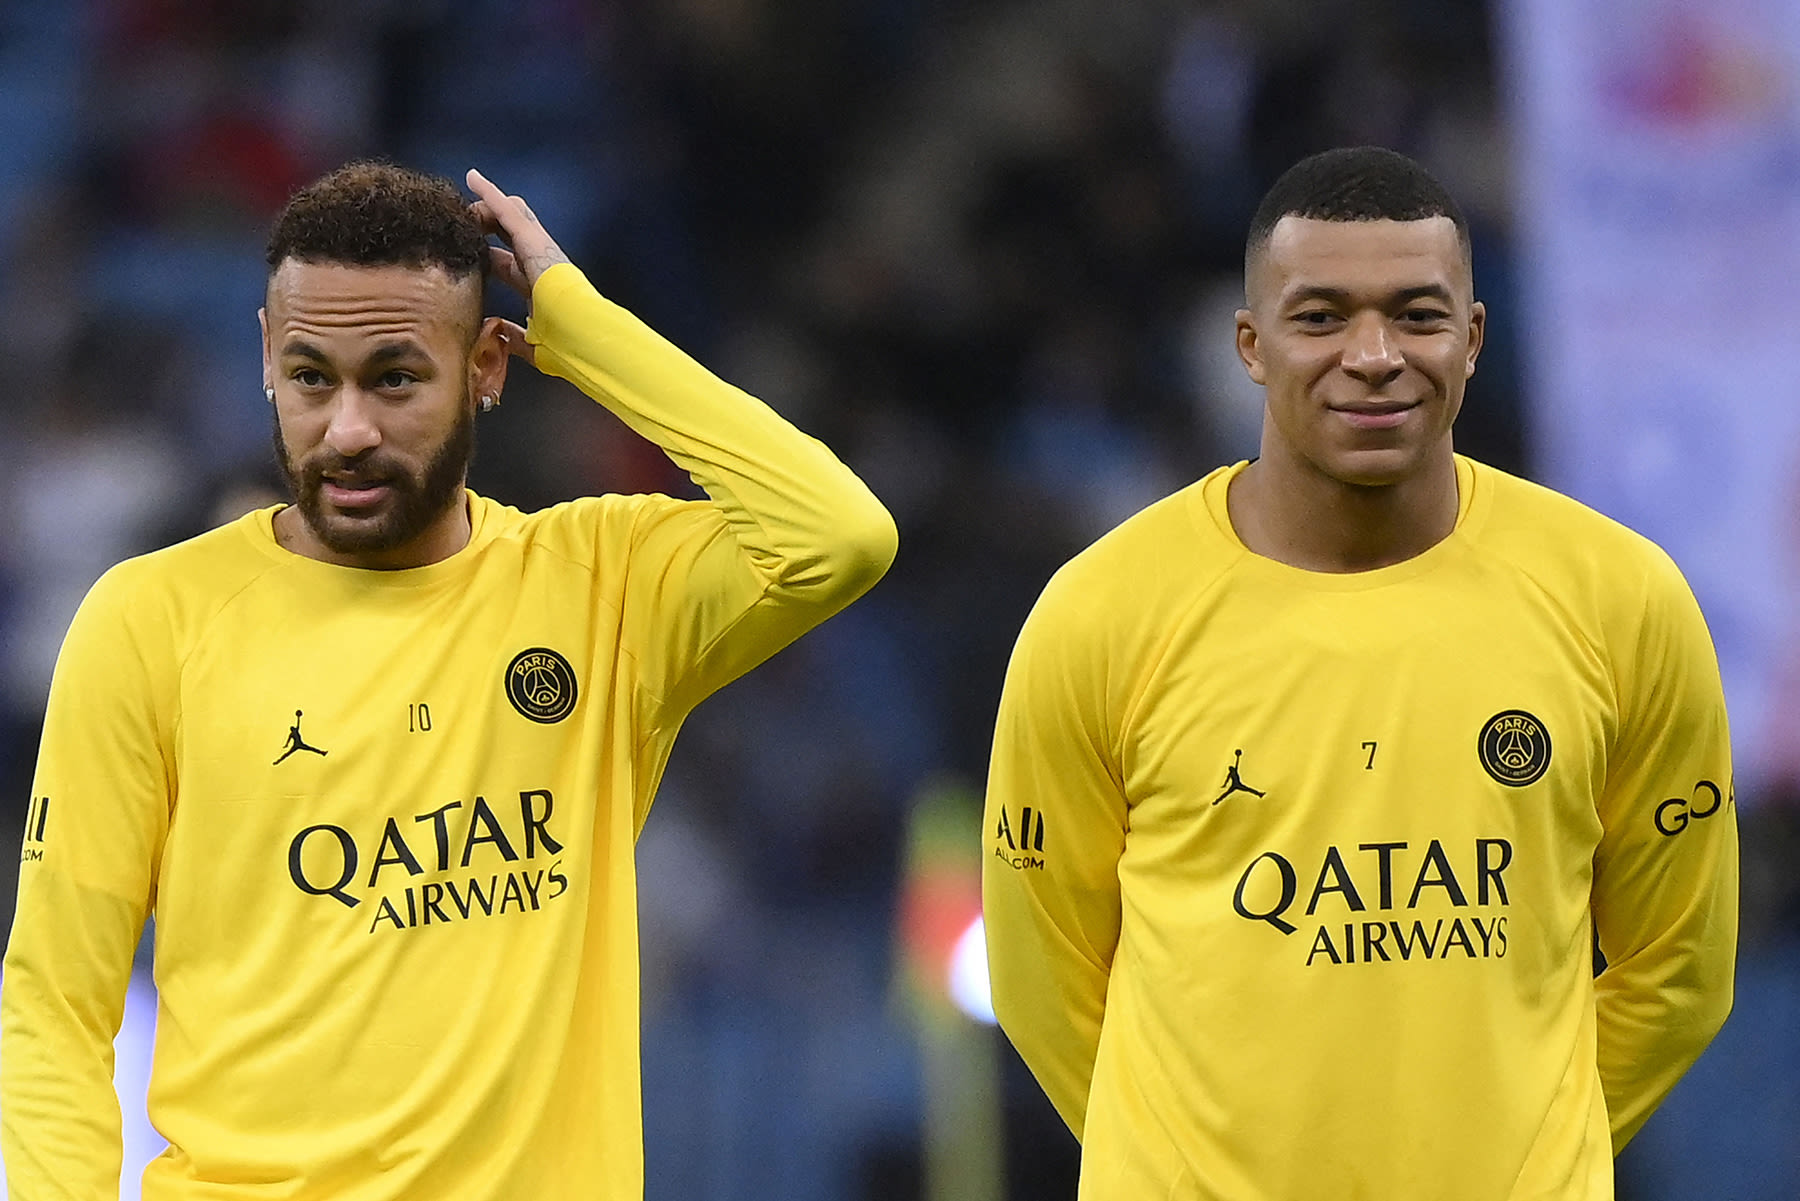 Ex-PSG Star Could Replicate Neymar Issues at Real Madrid, Expert Believes